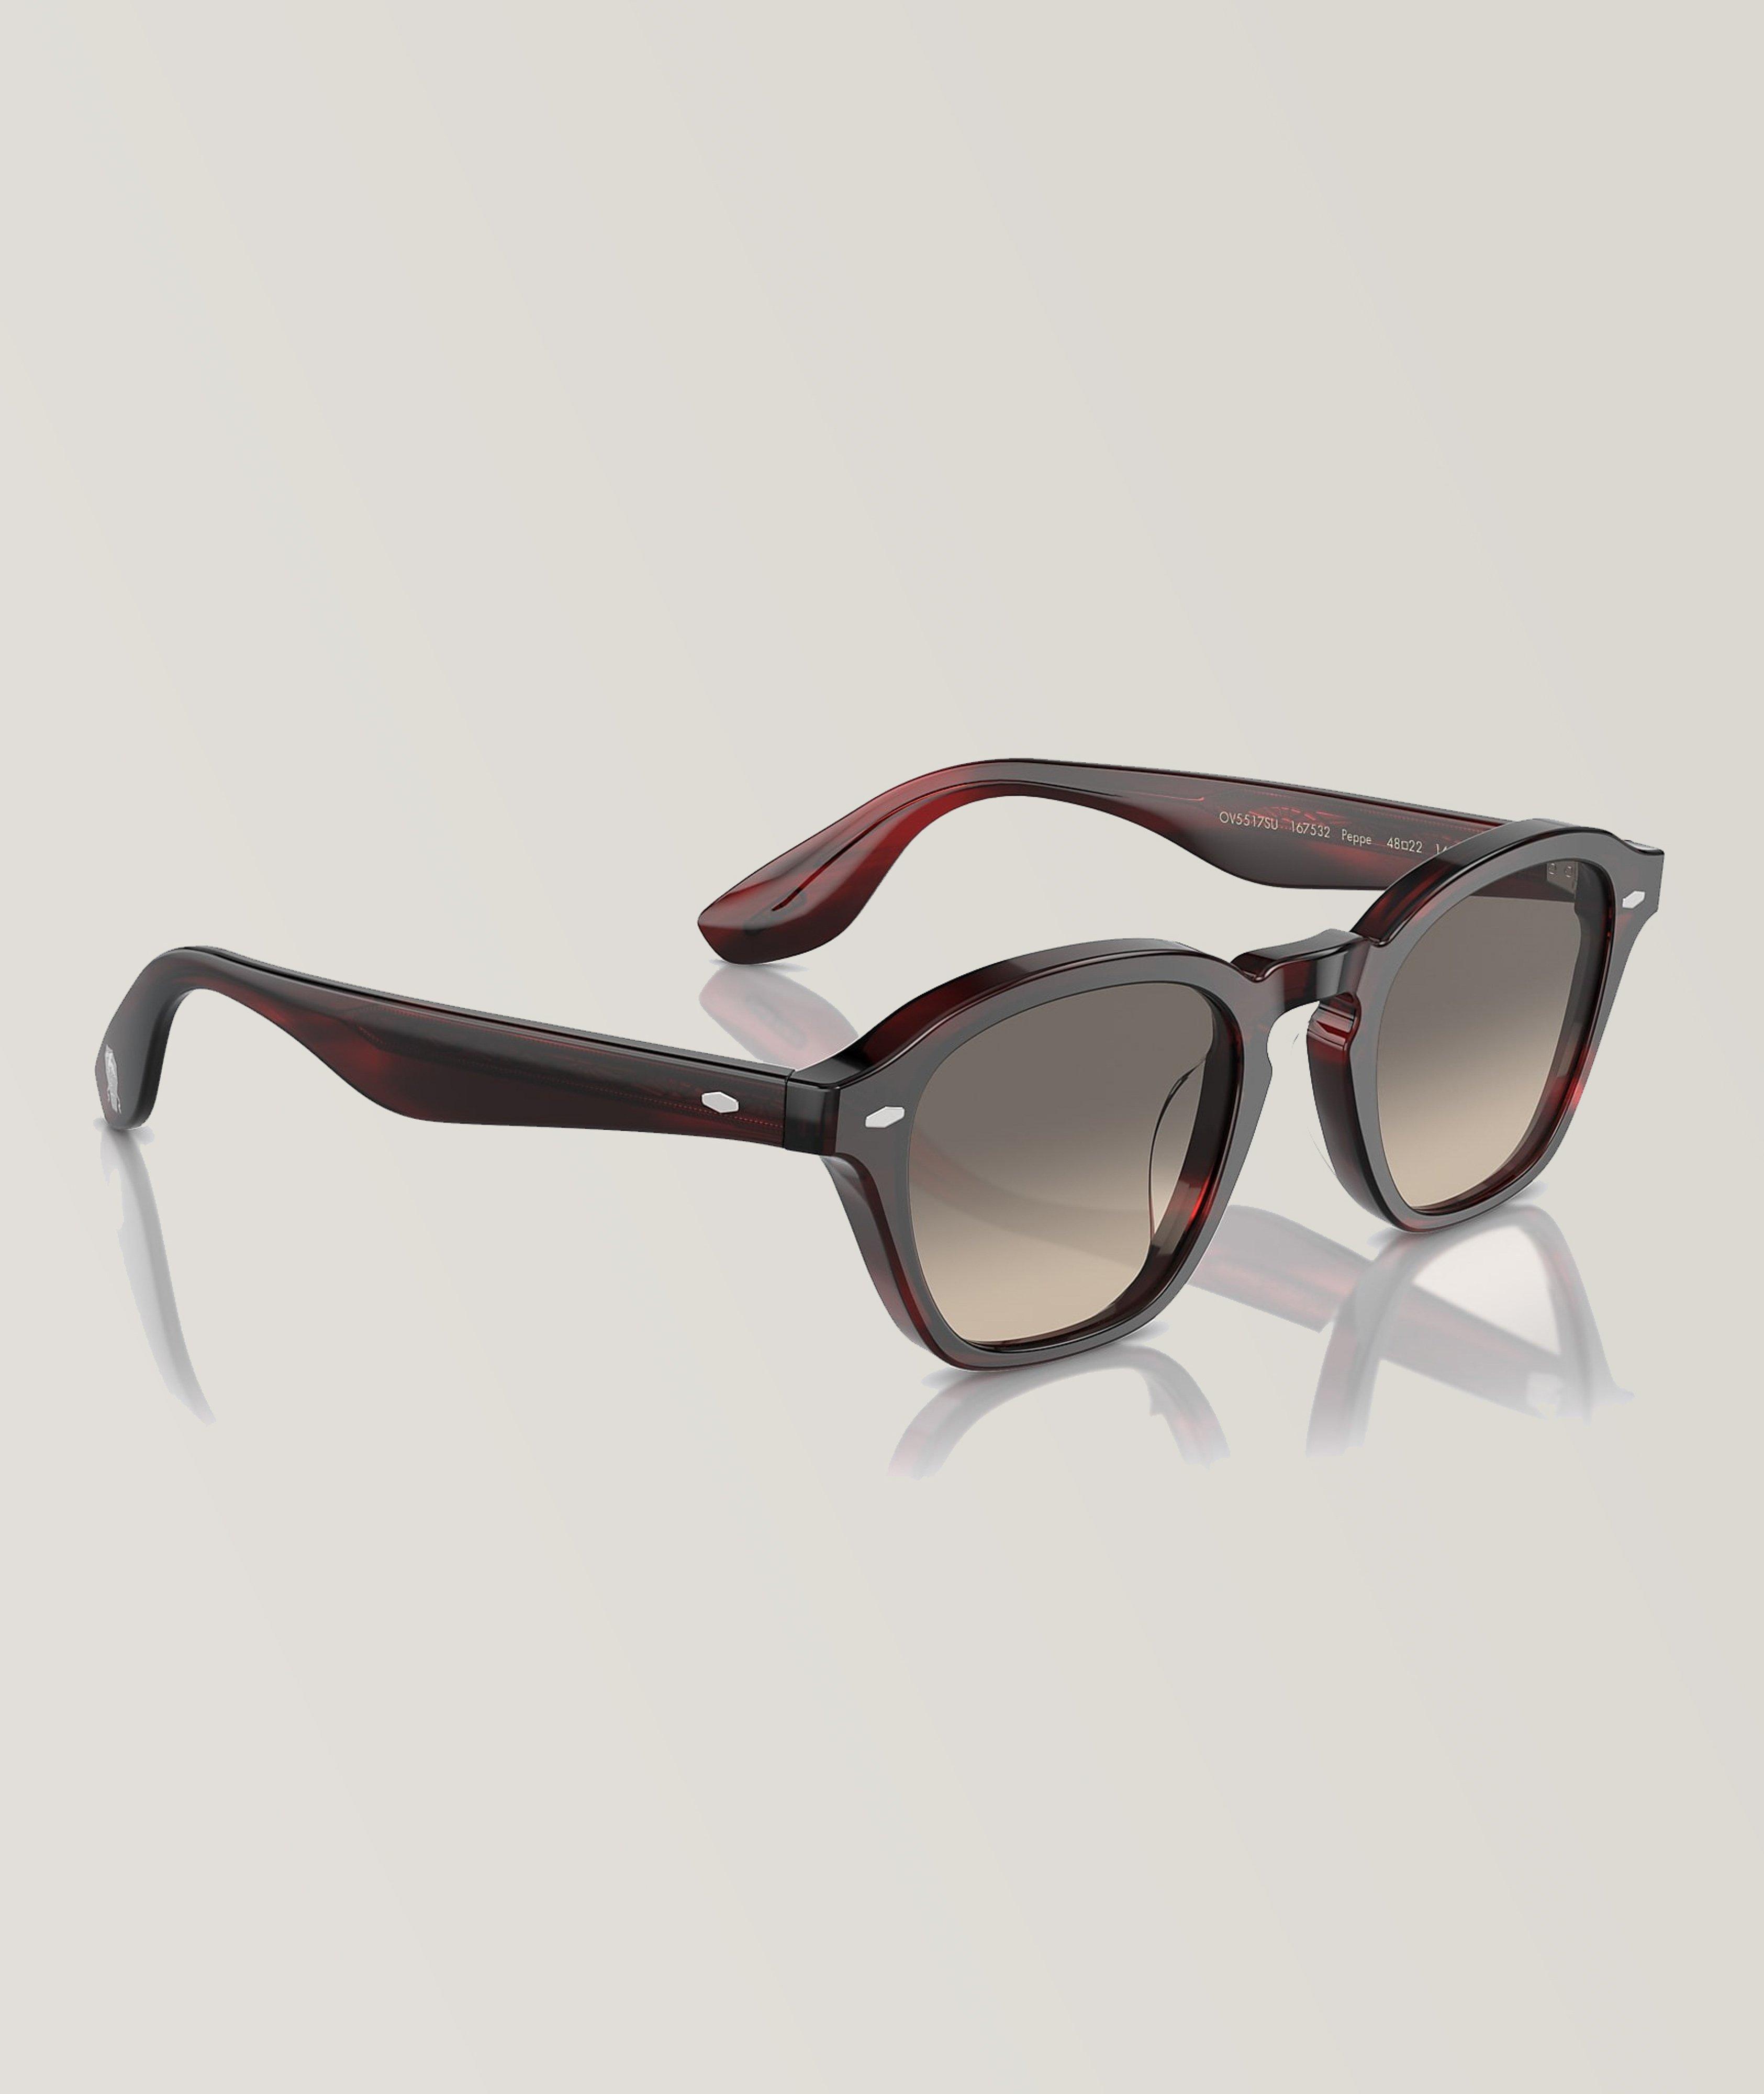 Lunettes de soleil Peppe, collection Oliver Peoples image 2